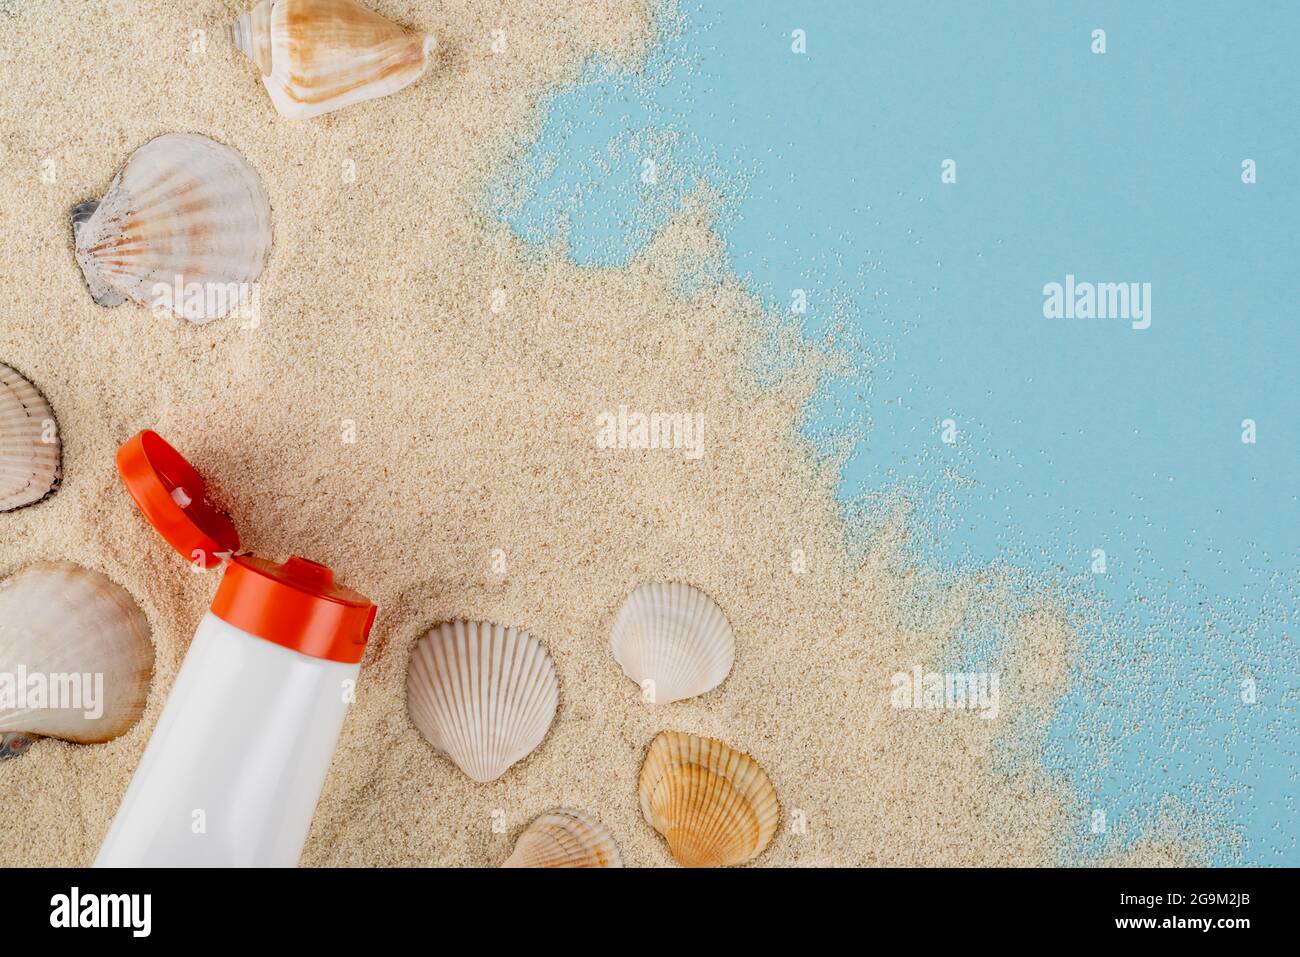 top view of tube of sunblock and seashells on sand and blue surface Stock Photo